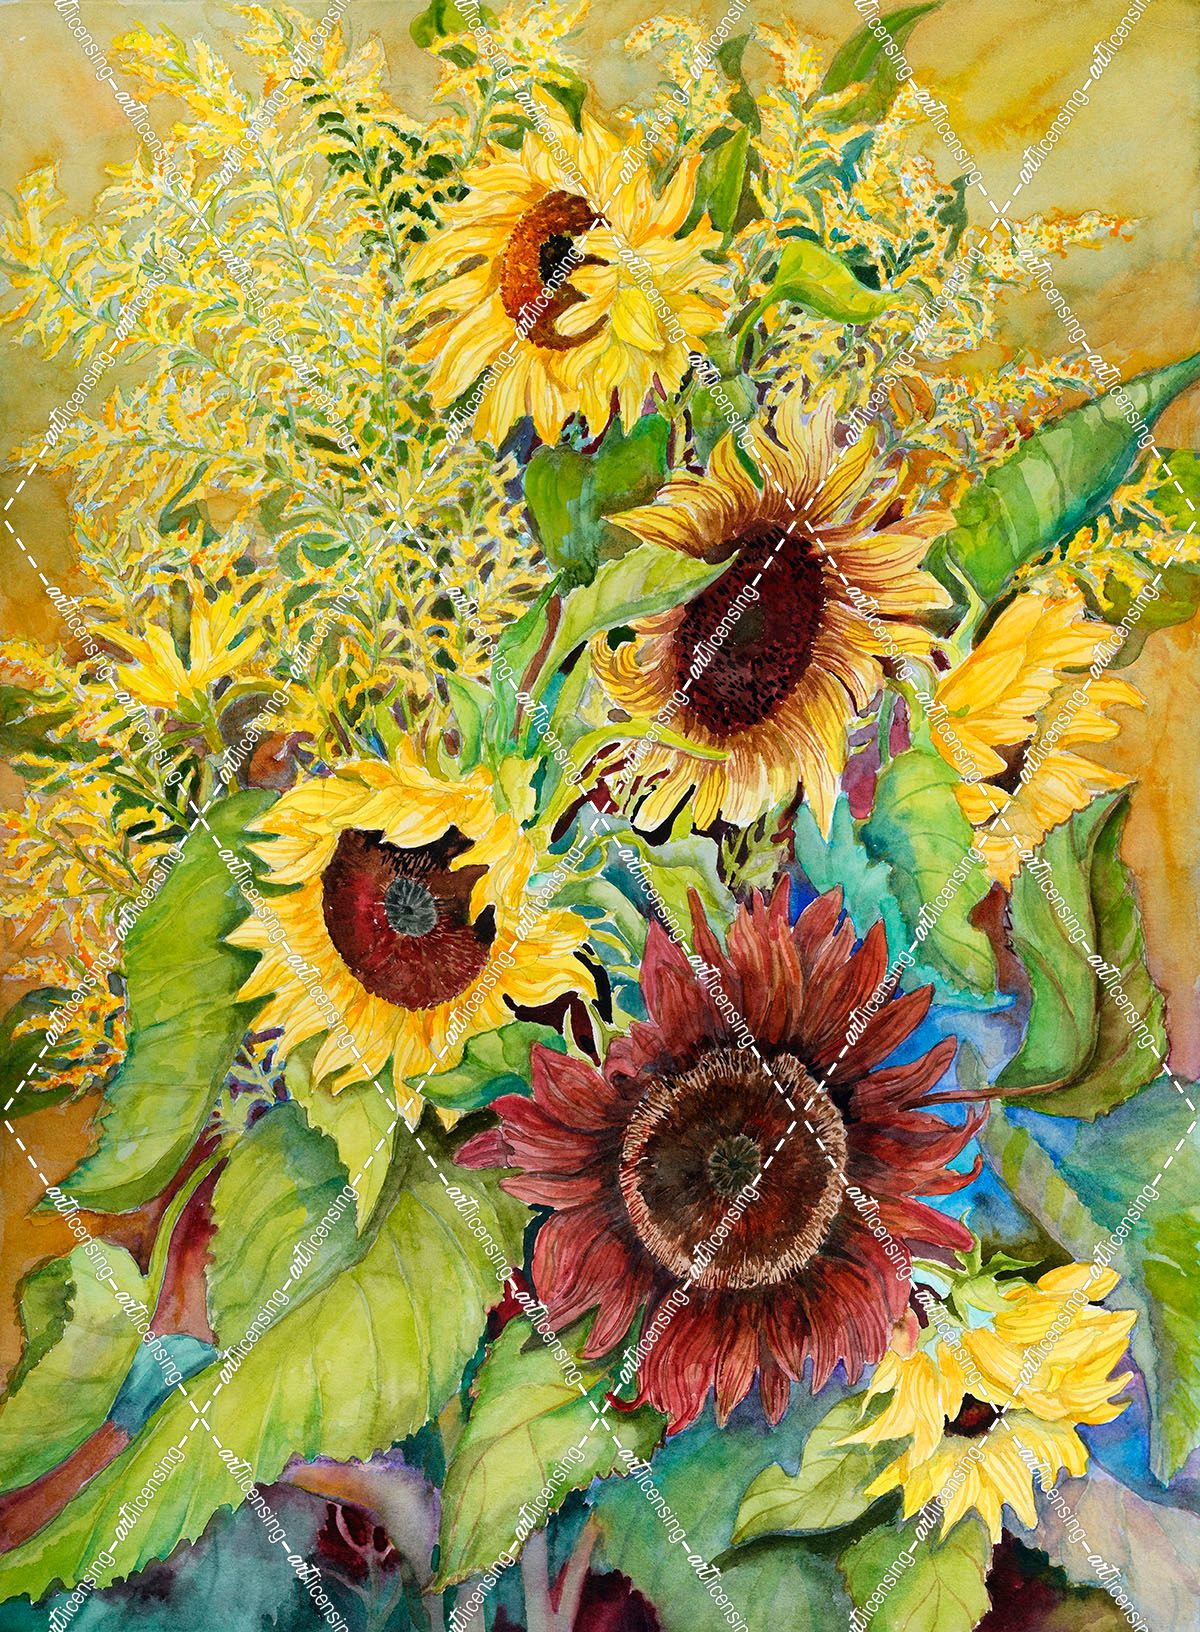 Sunflowers and Goldenrods